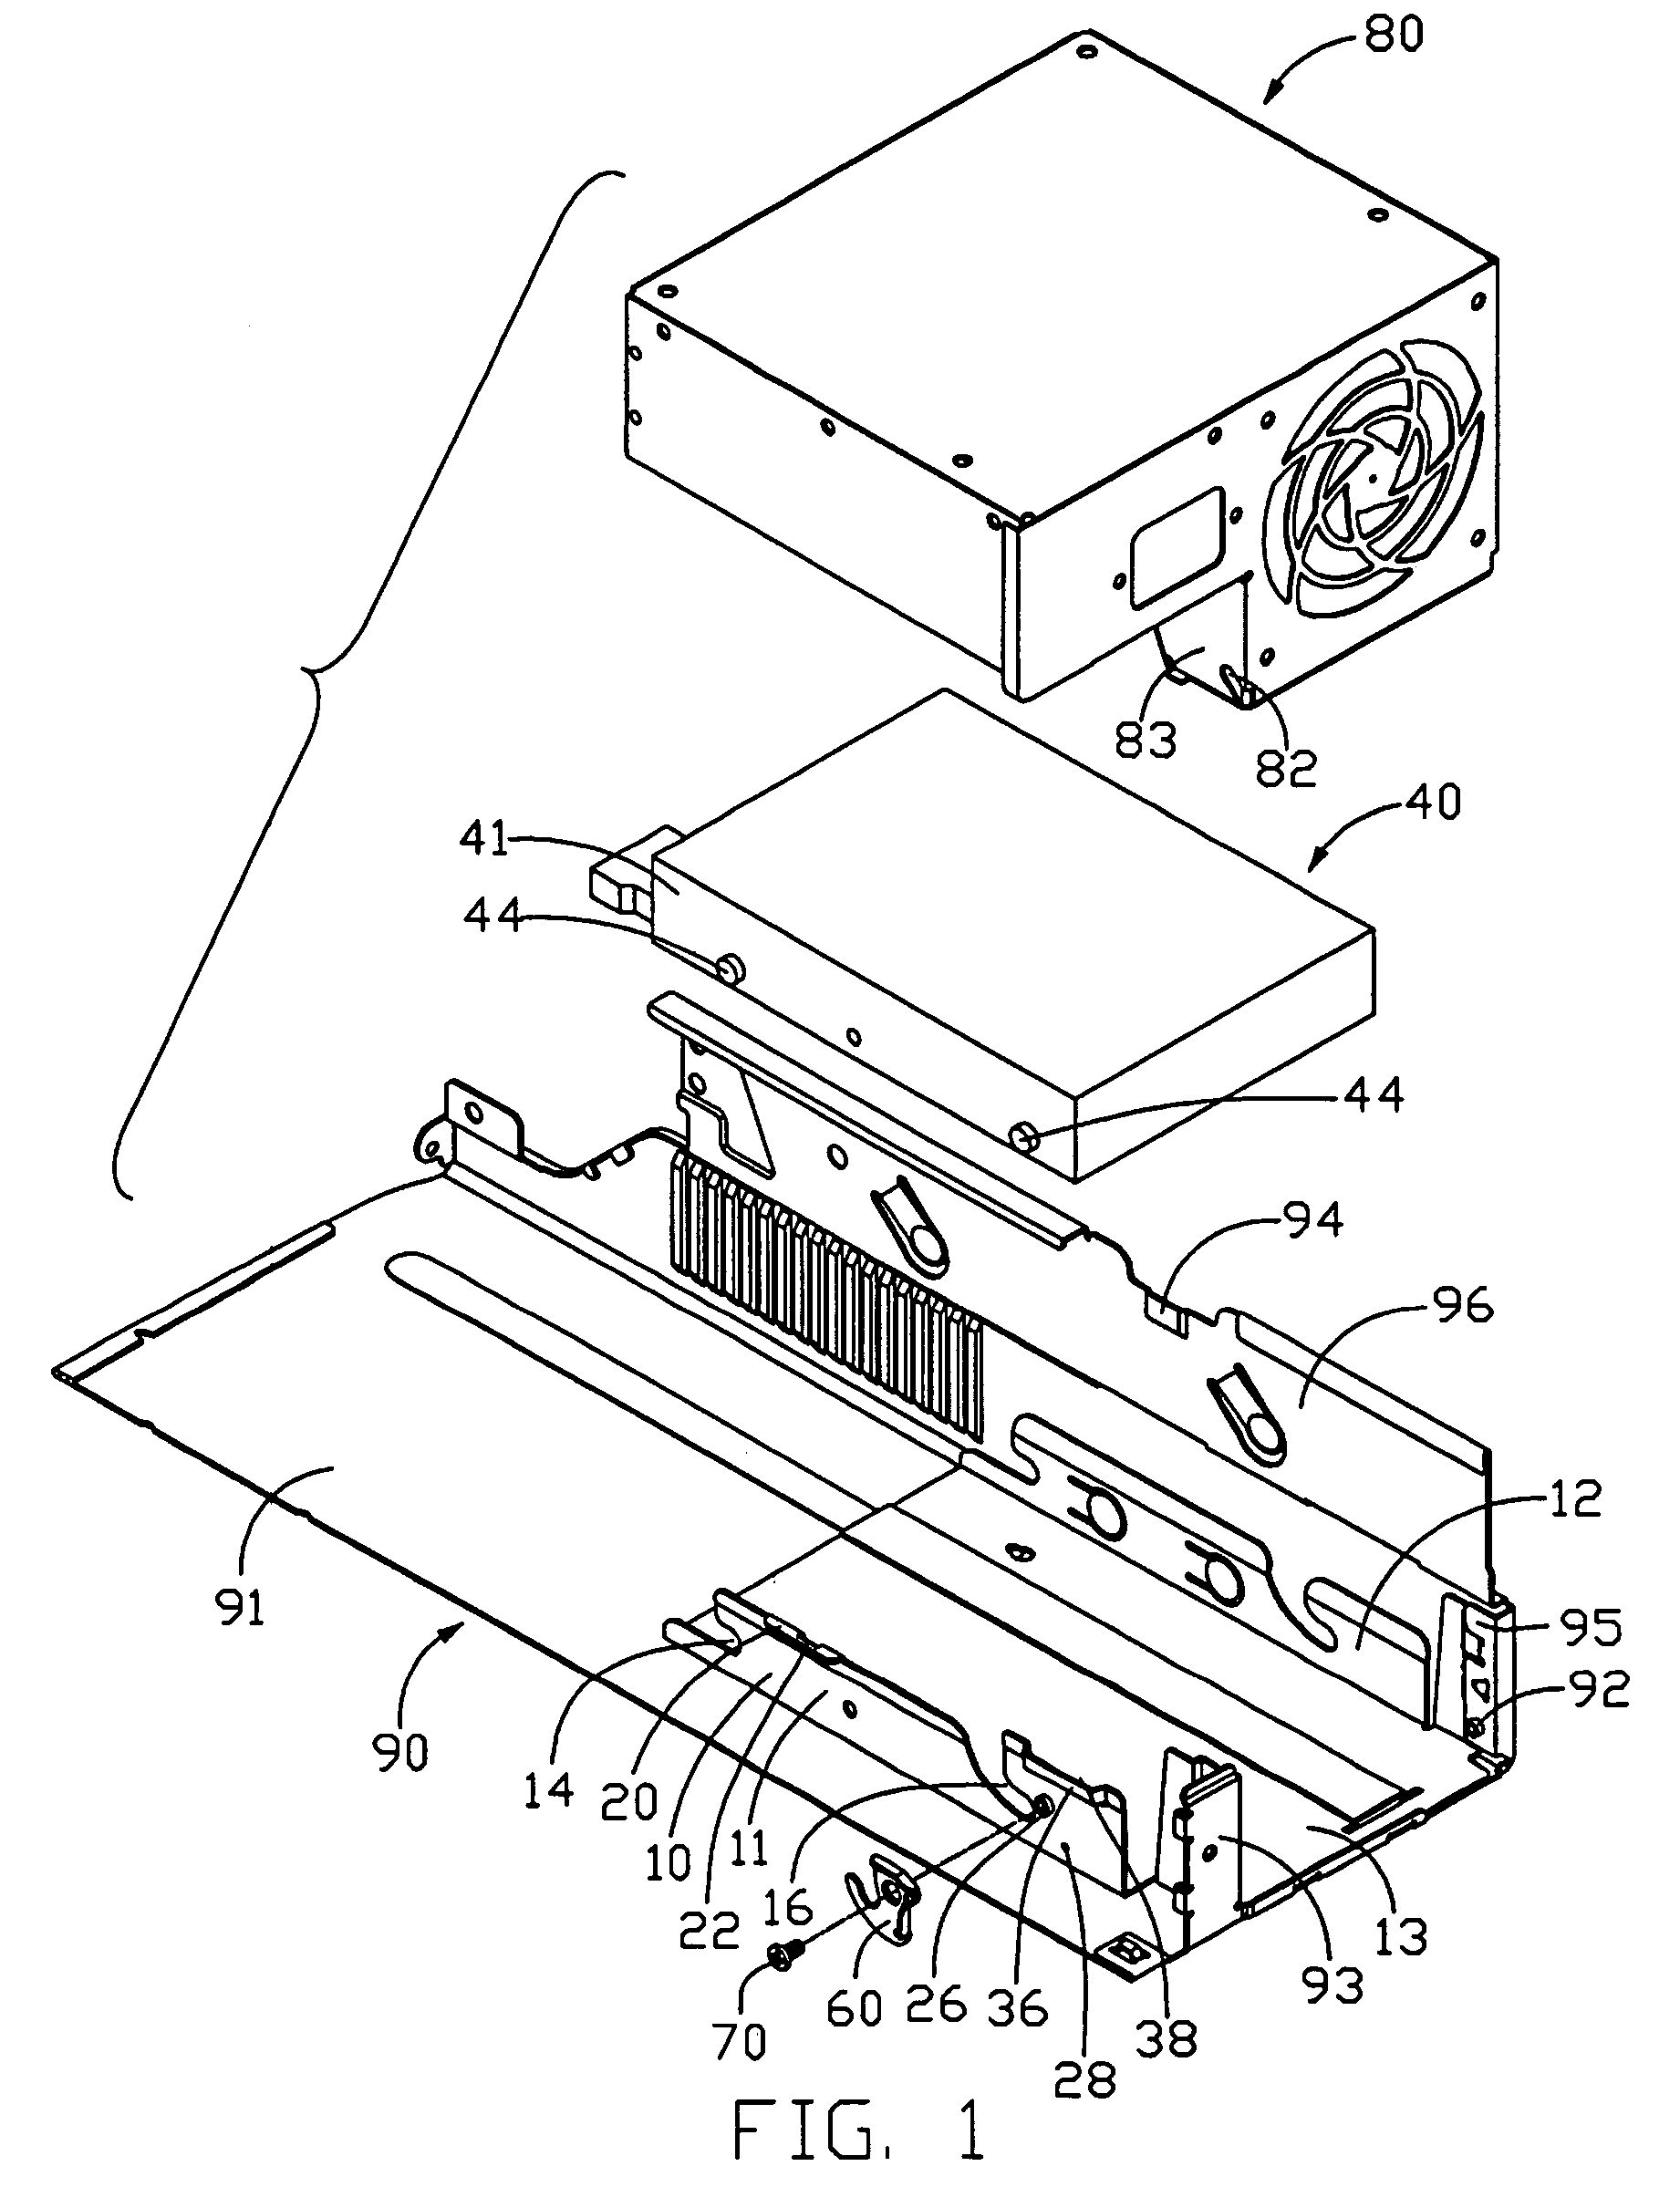 Mounting mechanism for storage device